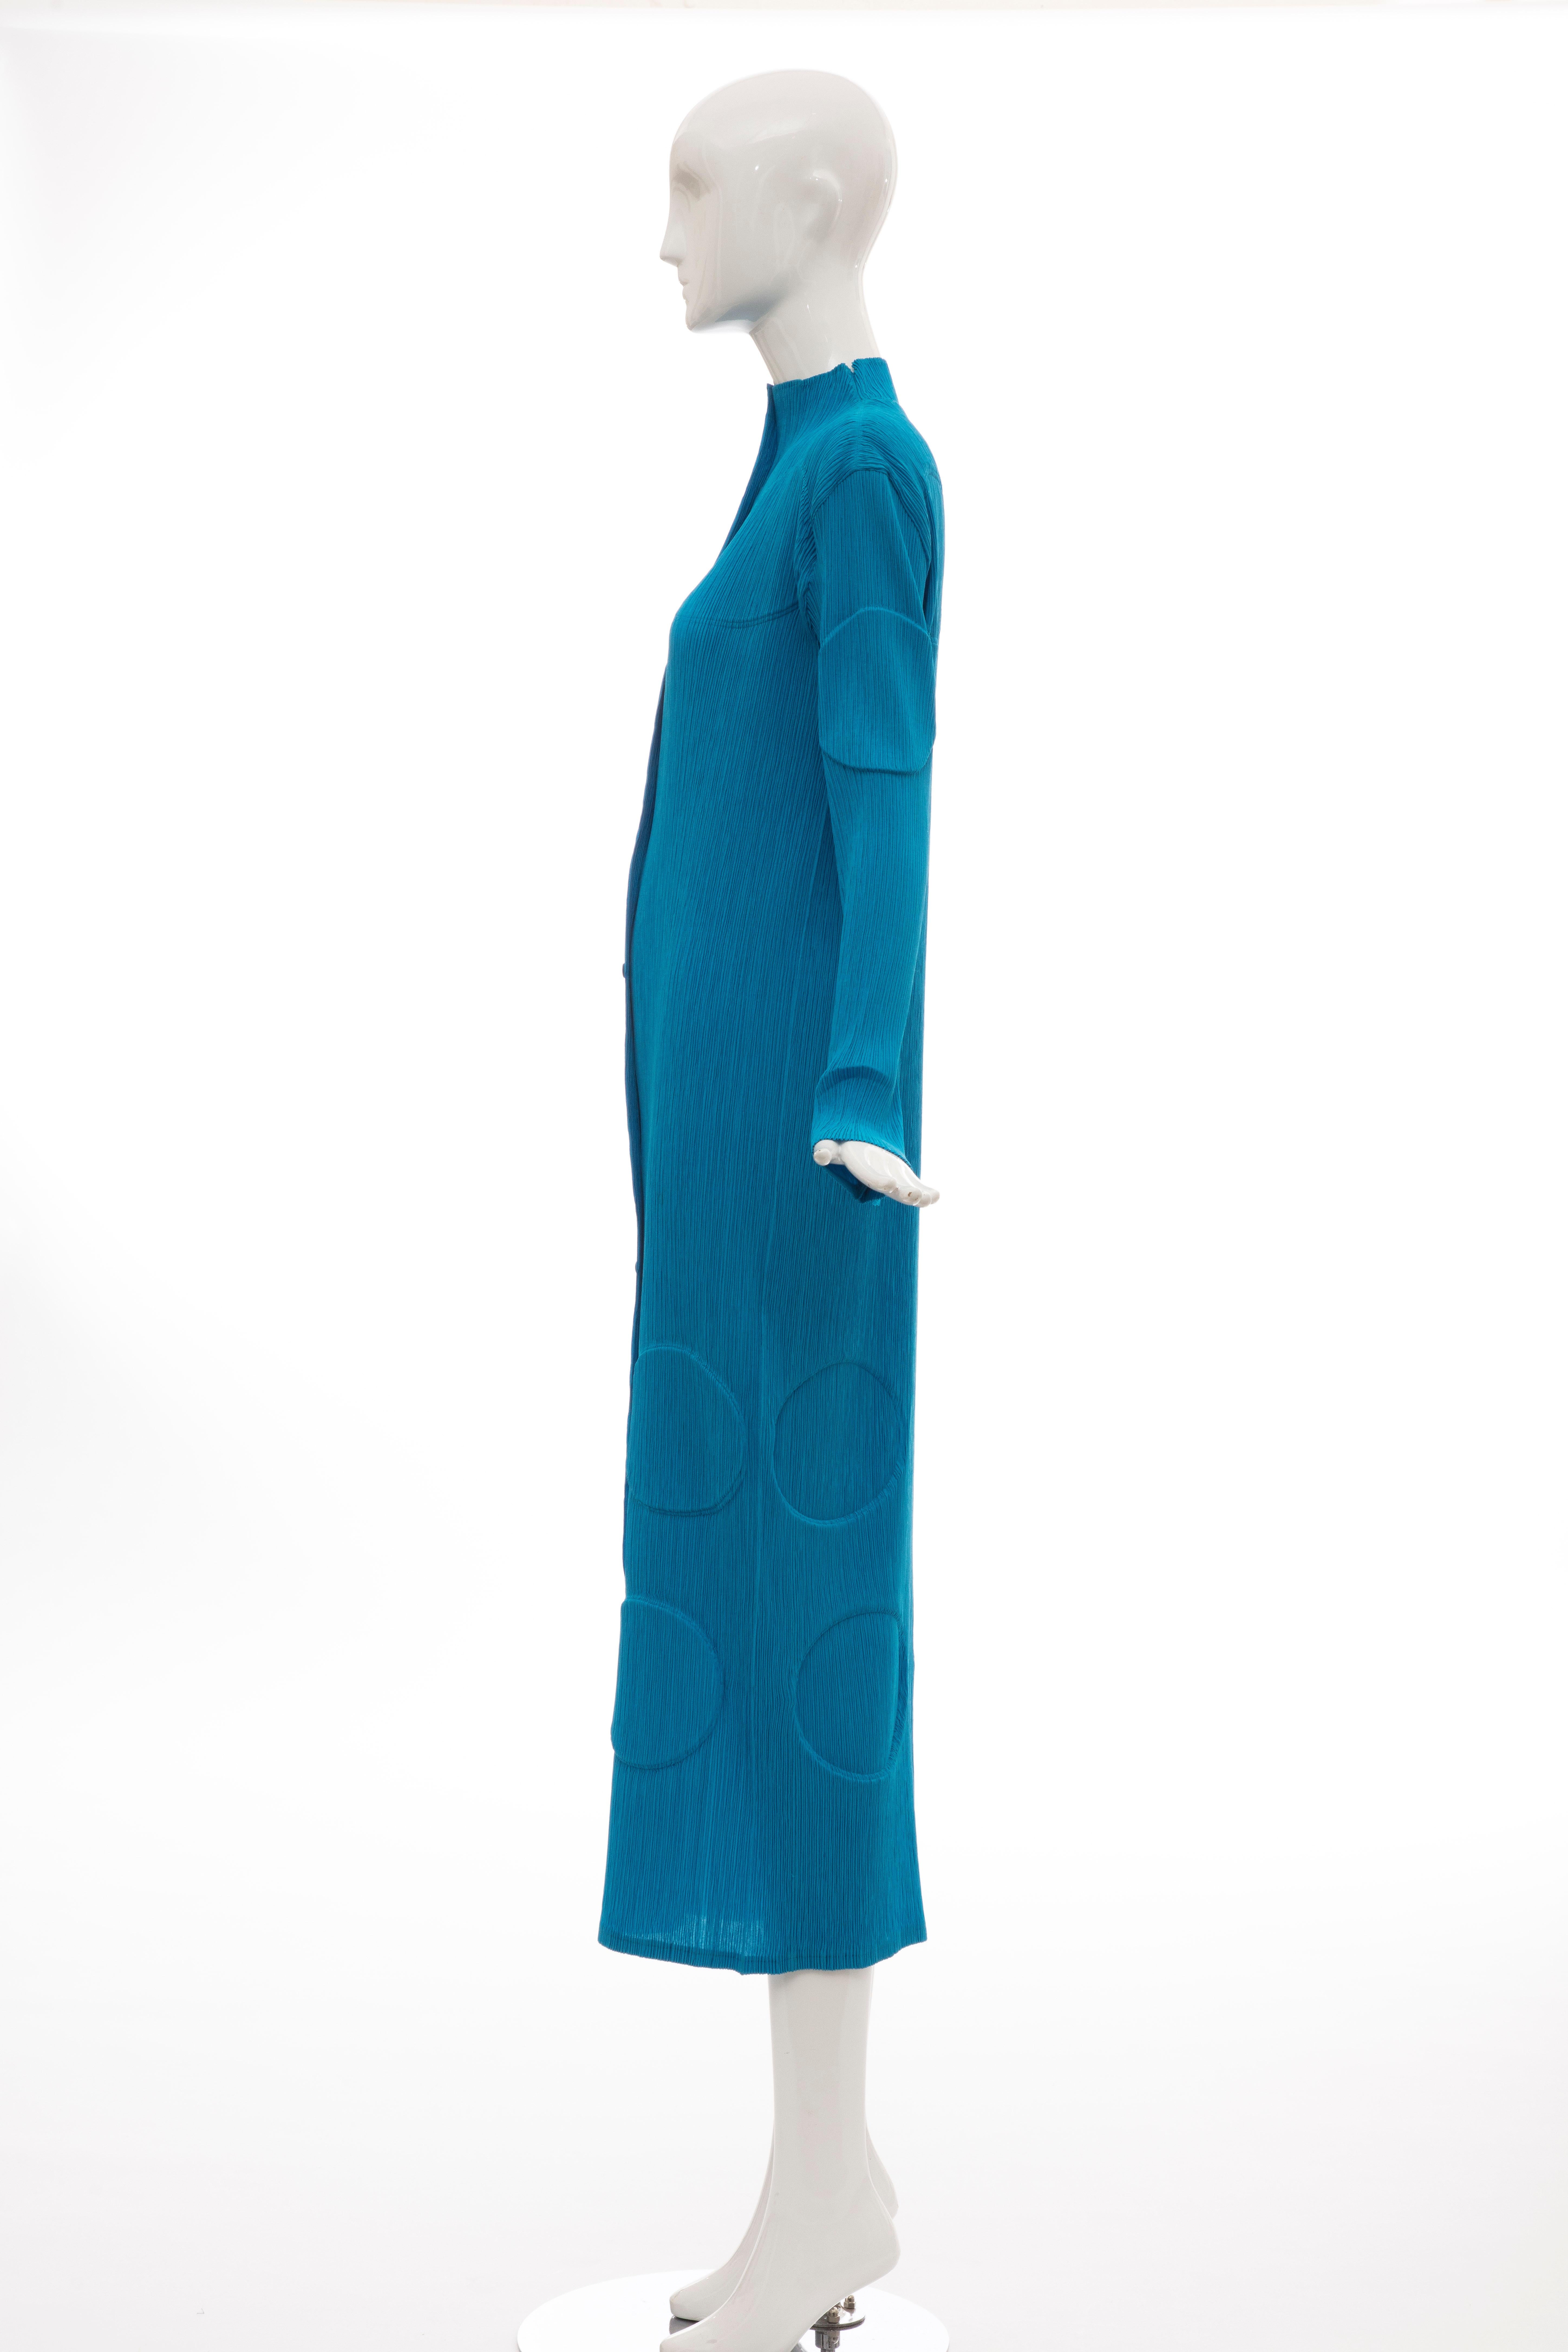 Issey Miyake Turquoise Long Button Front Cardigan, Circa 1990s For Sale 6